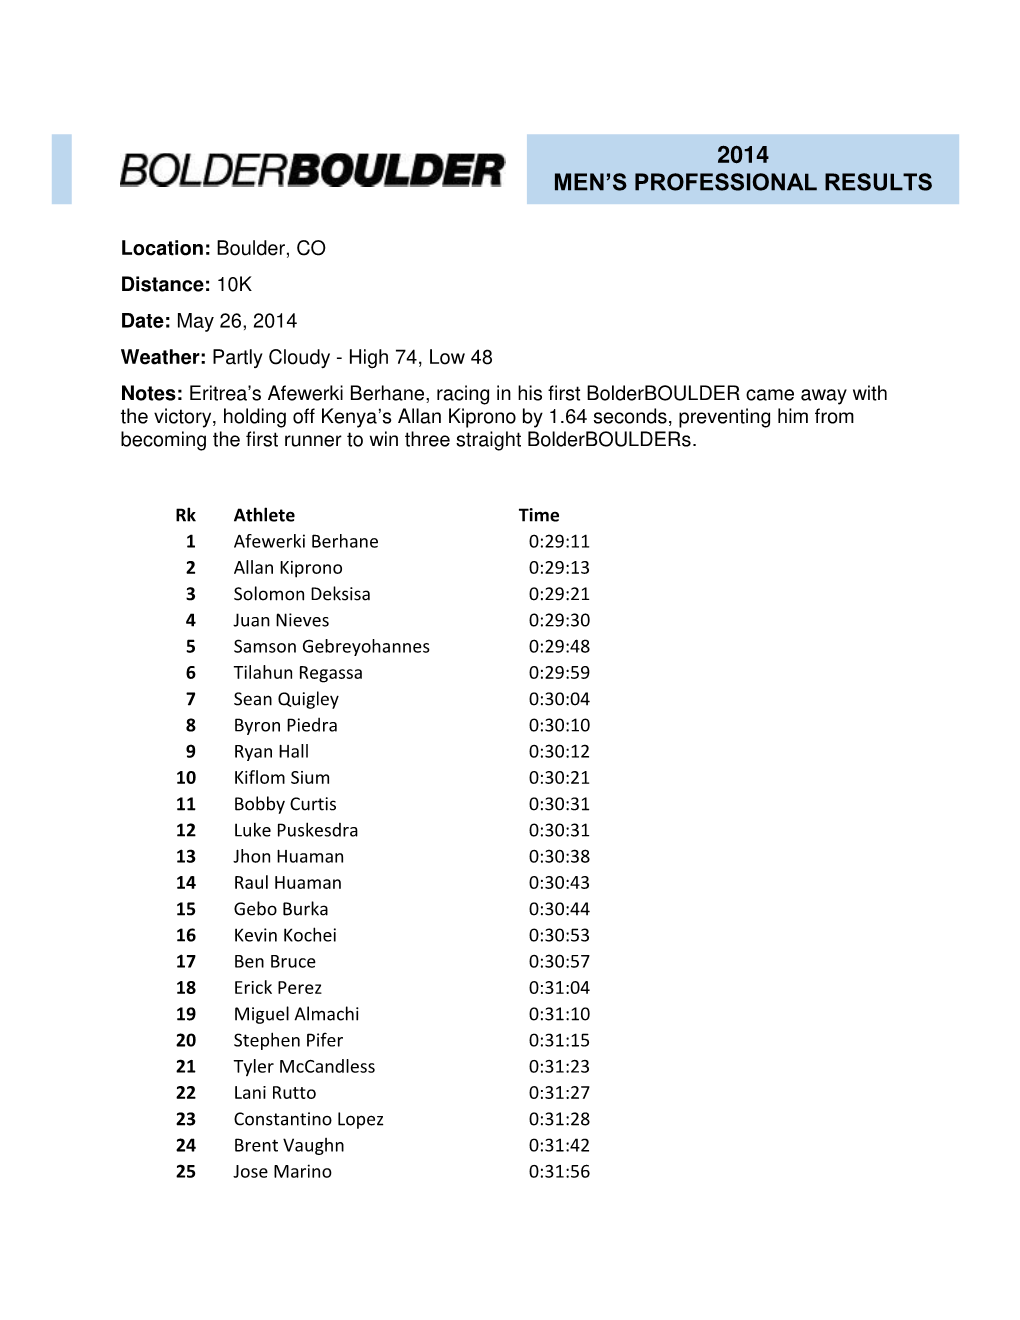 2014 Men's Professional Results